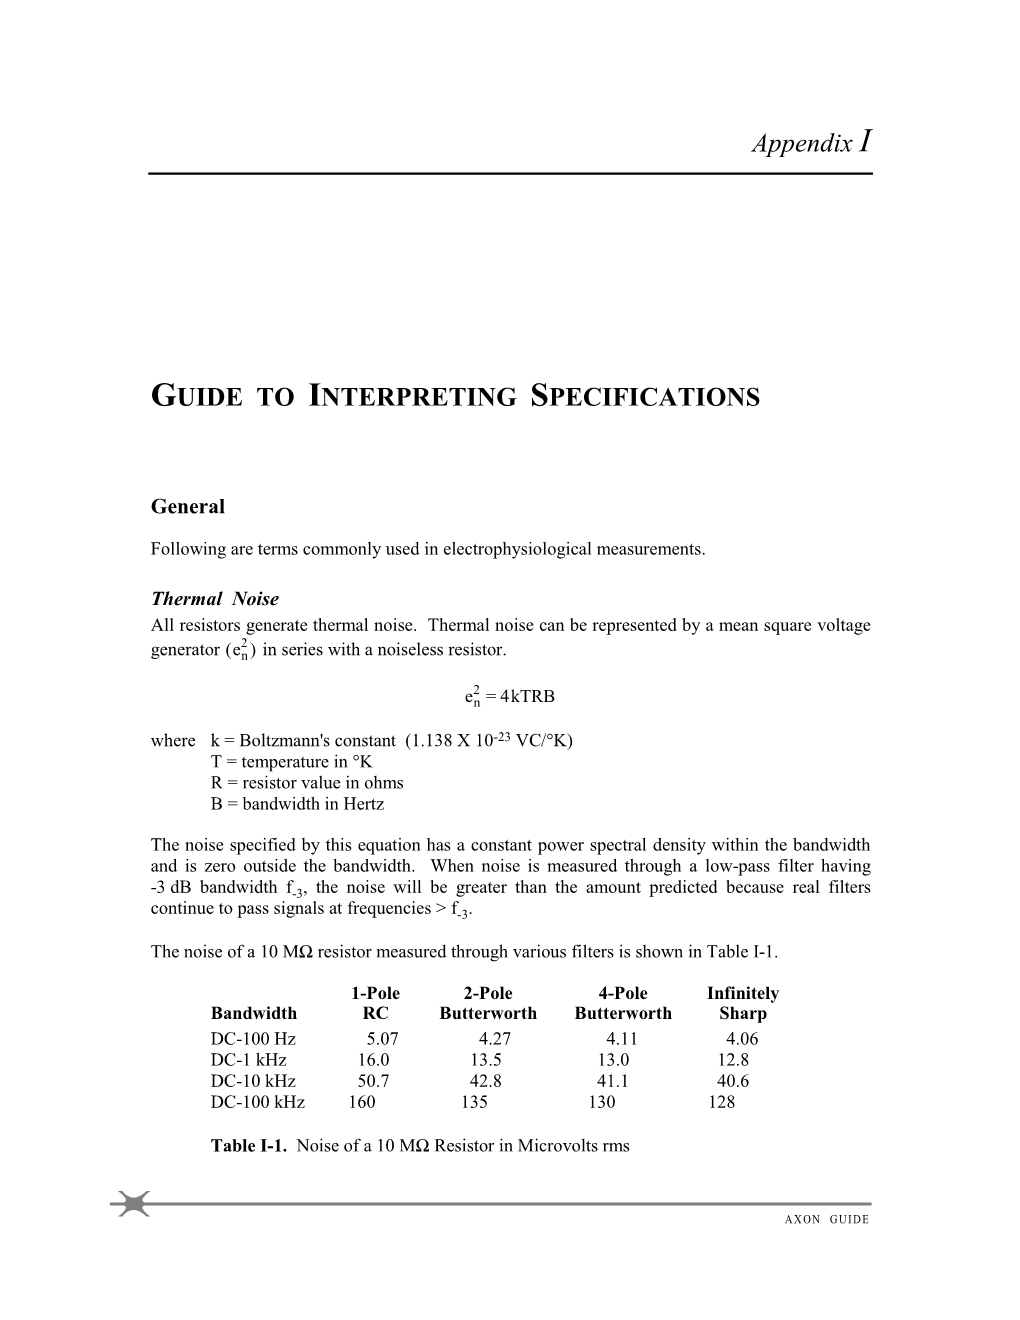 Appendix I GUIDE to INTERPRETING SPECIFICATIONS